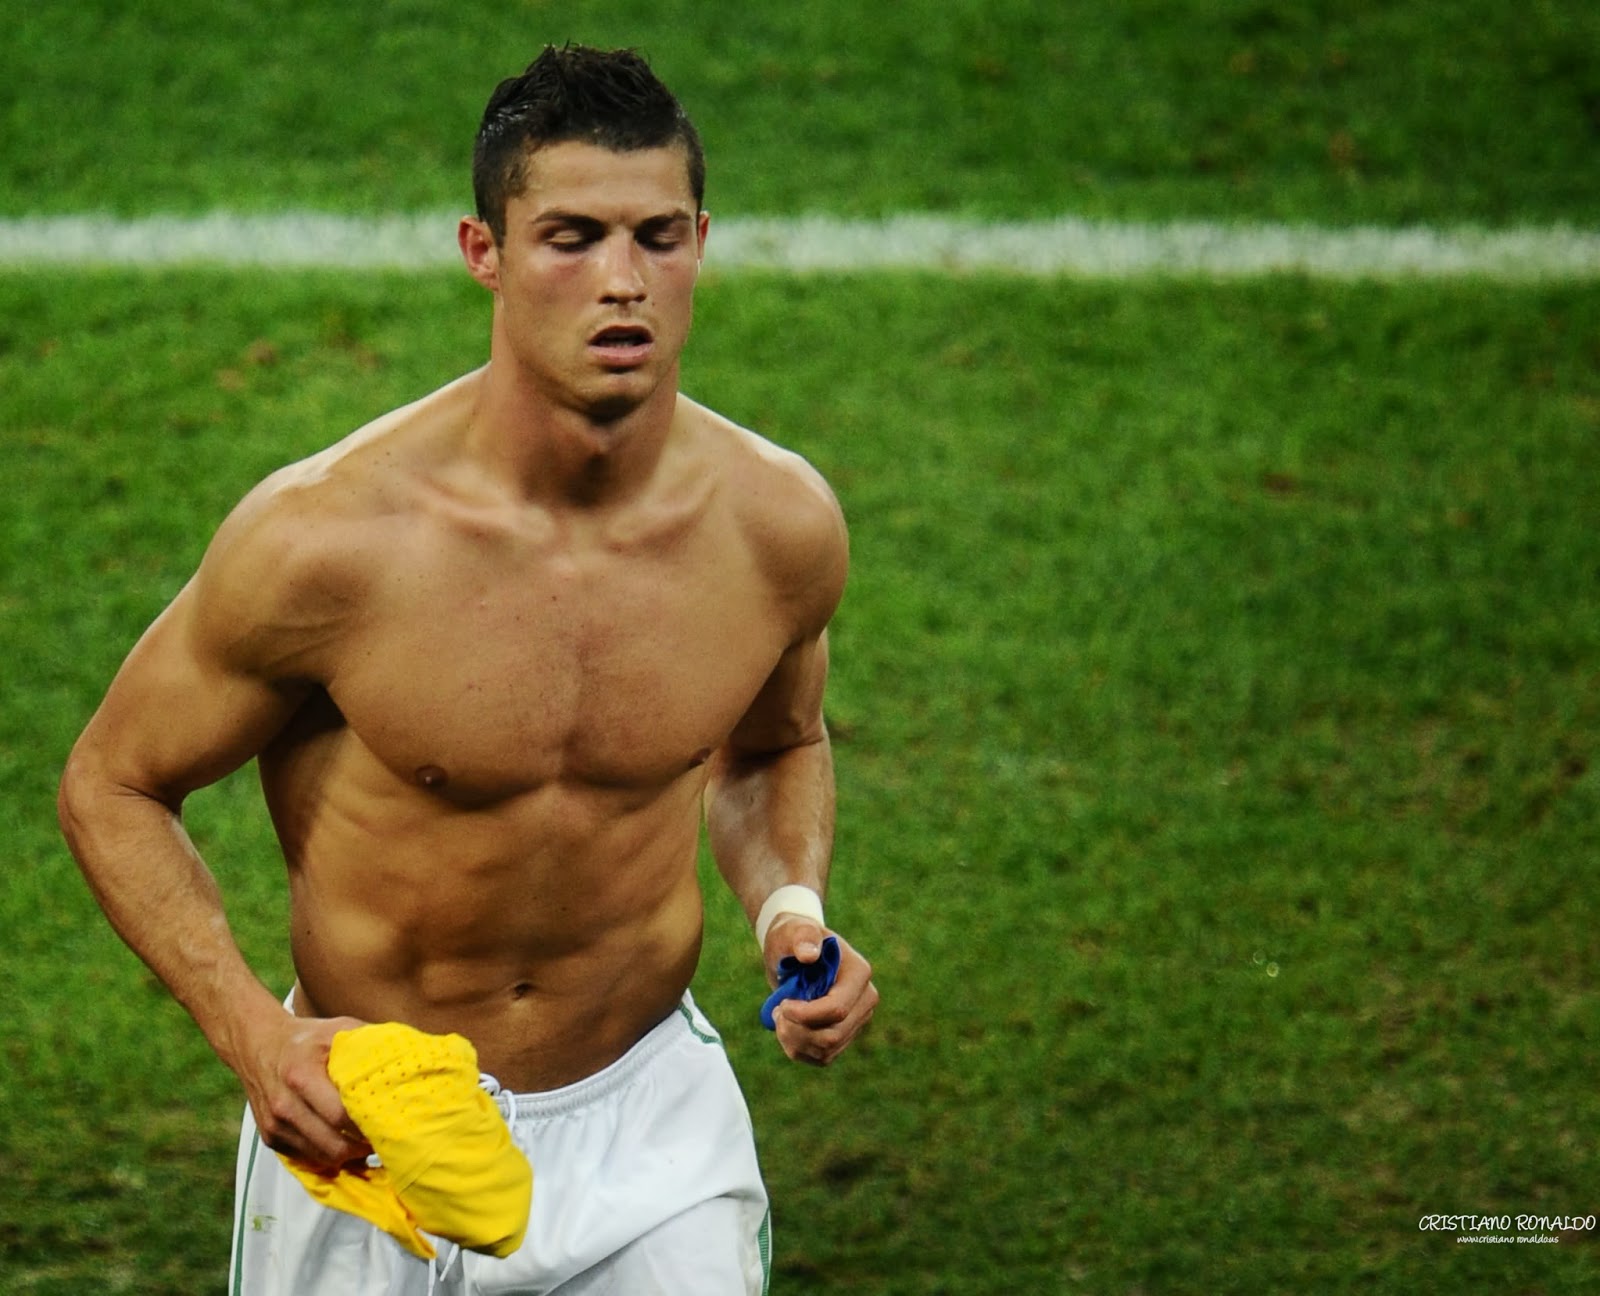 Cristiano Ronaldo Sexy Pictures. | Oh My Fiesta For Ladies!